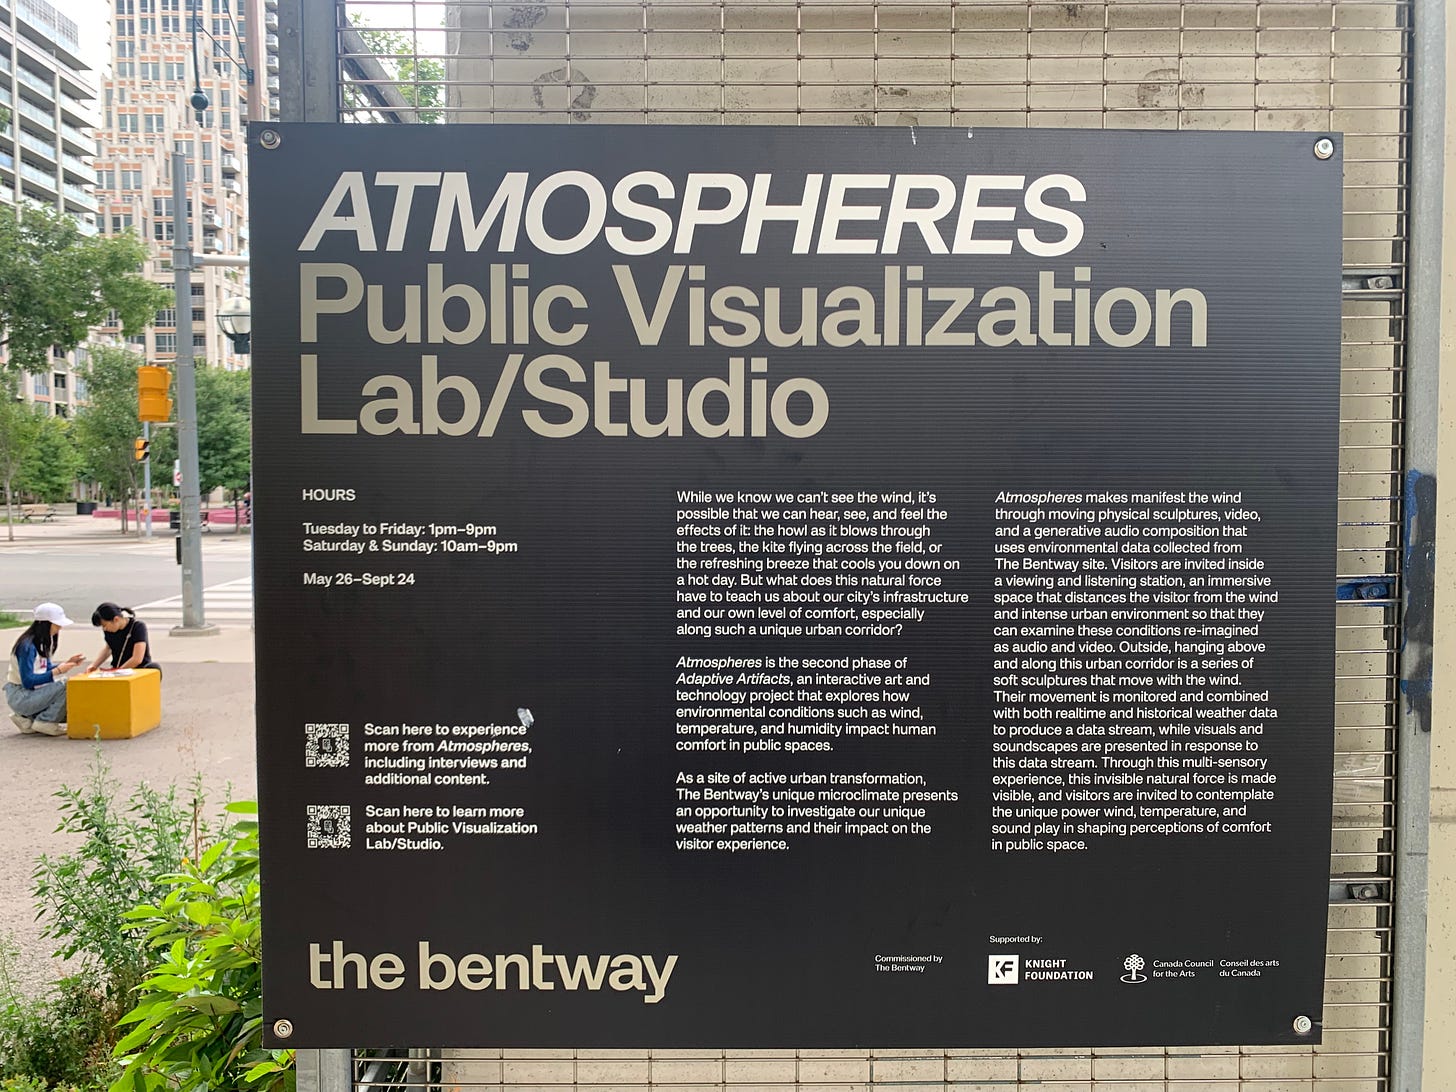 Sign that says: "ATMOSPHERES, Public Visualization Lab/Studio. While we know we can't see the wind, it's possible that we can hear, see and feel the effects of it: the howl as it blows through the trees, the kite flying across the field, or the refreshing breeze that cools you down on a hot day. But what does this natural force have to teach us about our city's infrastructure and our own level of comfort, expecially along such a unique urban corridor? Atmospheres is the second phase of Adaptive Artifacts, an interactive art and technology project that explores how environmental conditions such as wind, temperature, and humidity impact human comfort in public spaces. As a site of active urban transformation, The Bentway's unique microclimate presents and opportunity to investigate our weather patterns and their impact on the visitor experience. Atmospheres makes manifest the wind through moving physical sculptures, video, and a generative audio composition that uses environmental data collected from The Bentway site. Visitors are invited inside a viewing and listening station, an immersive space that distances the visitor from the wind and intense urban environment so that they can examine these conditions re-imagined as audio and video. Outside, hanging above and along this urban corridor is a series of soft sculptures that move with the wind. Their movement is monitored and combined with both realtime and historical weather data to produce a data stream, while visuals and soundscapes are presented in response to this data stream. Through this multi-sensory experience, this invisible natural force is made visible, and visitors are invited to contemplate the unique power wind, temperature, and sound play in shaping perceptions of comfort in public space.